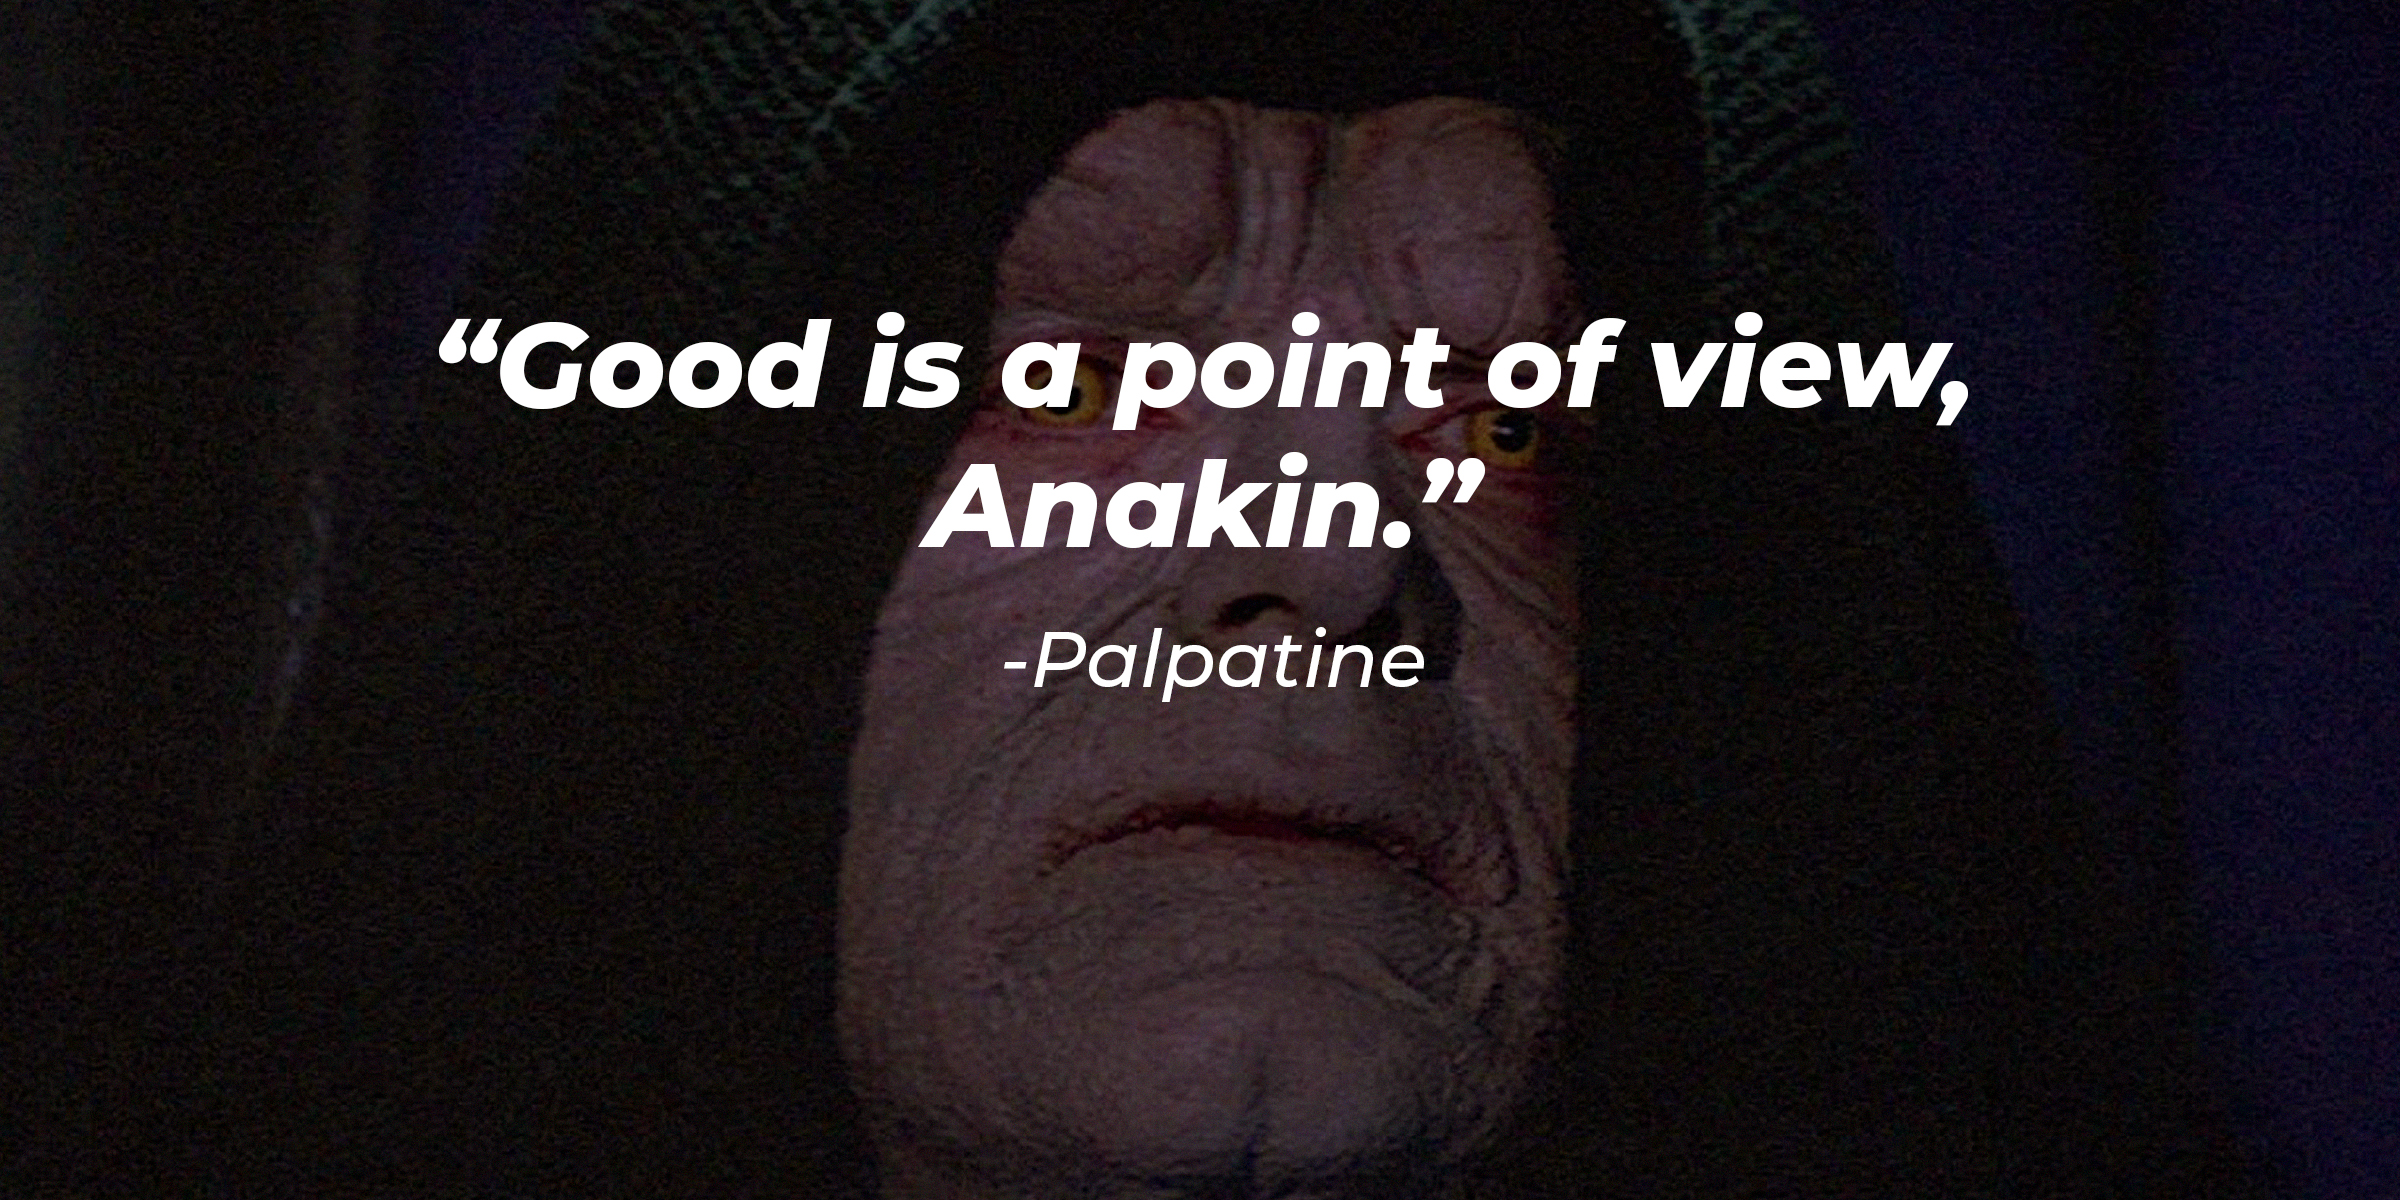 Palpatine with his quote: “Good is a point of view, Anakin.” | Source: Facebook.com/StarWars